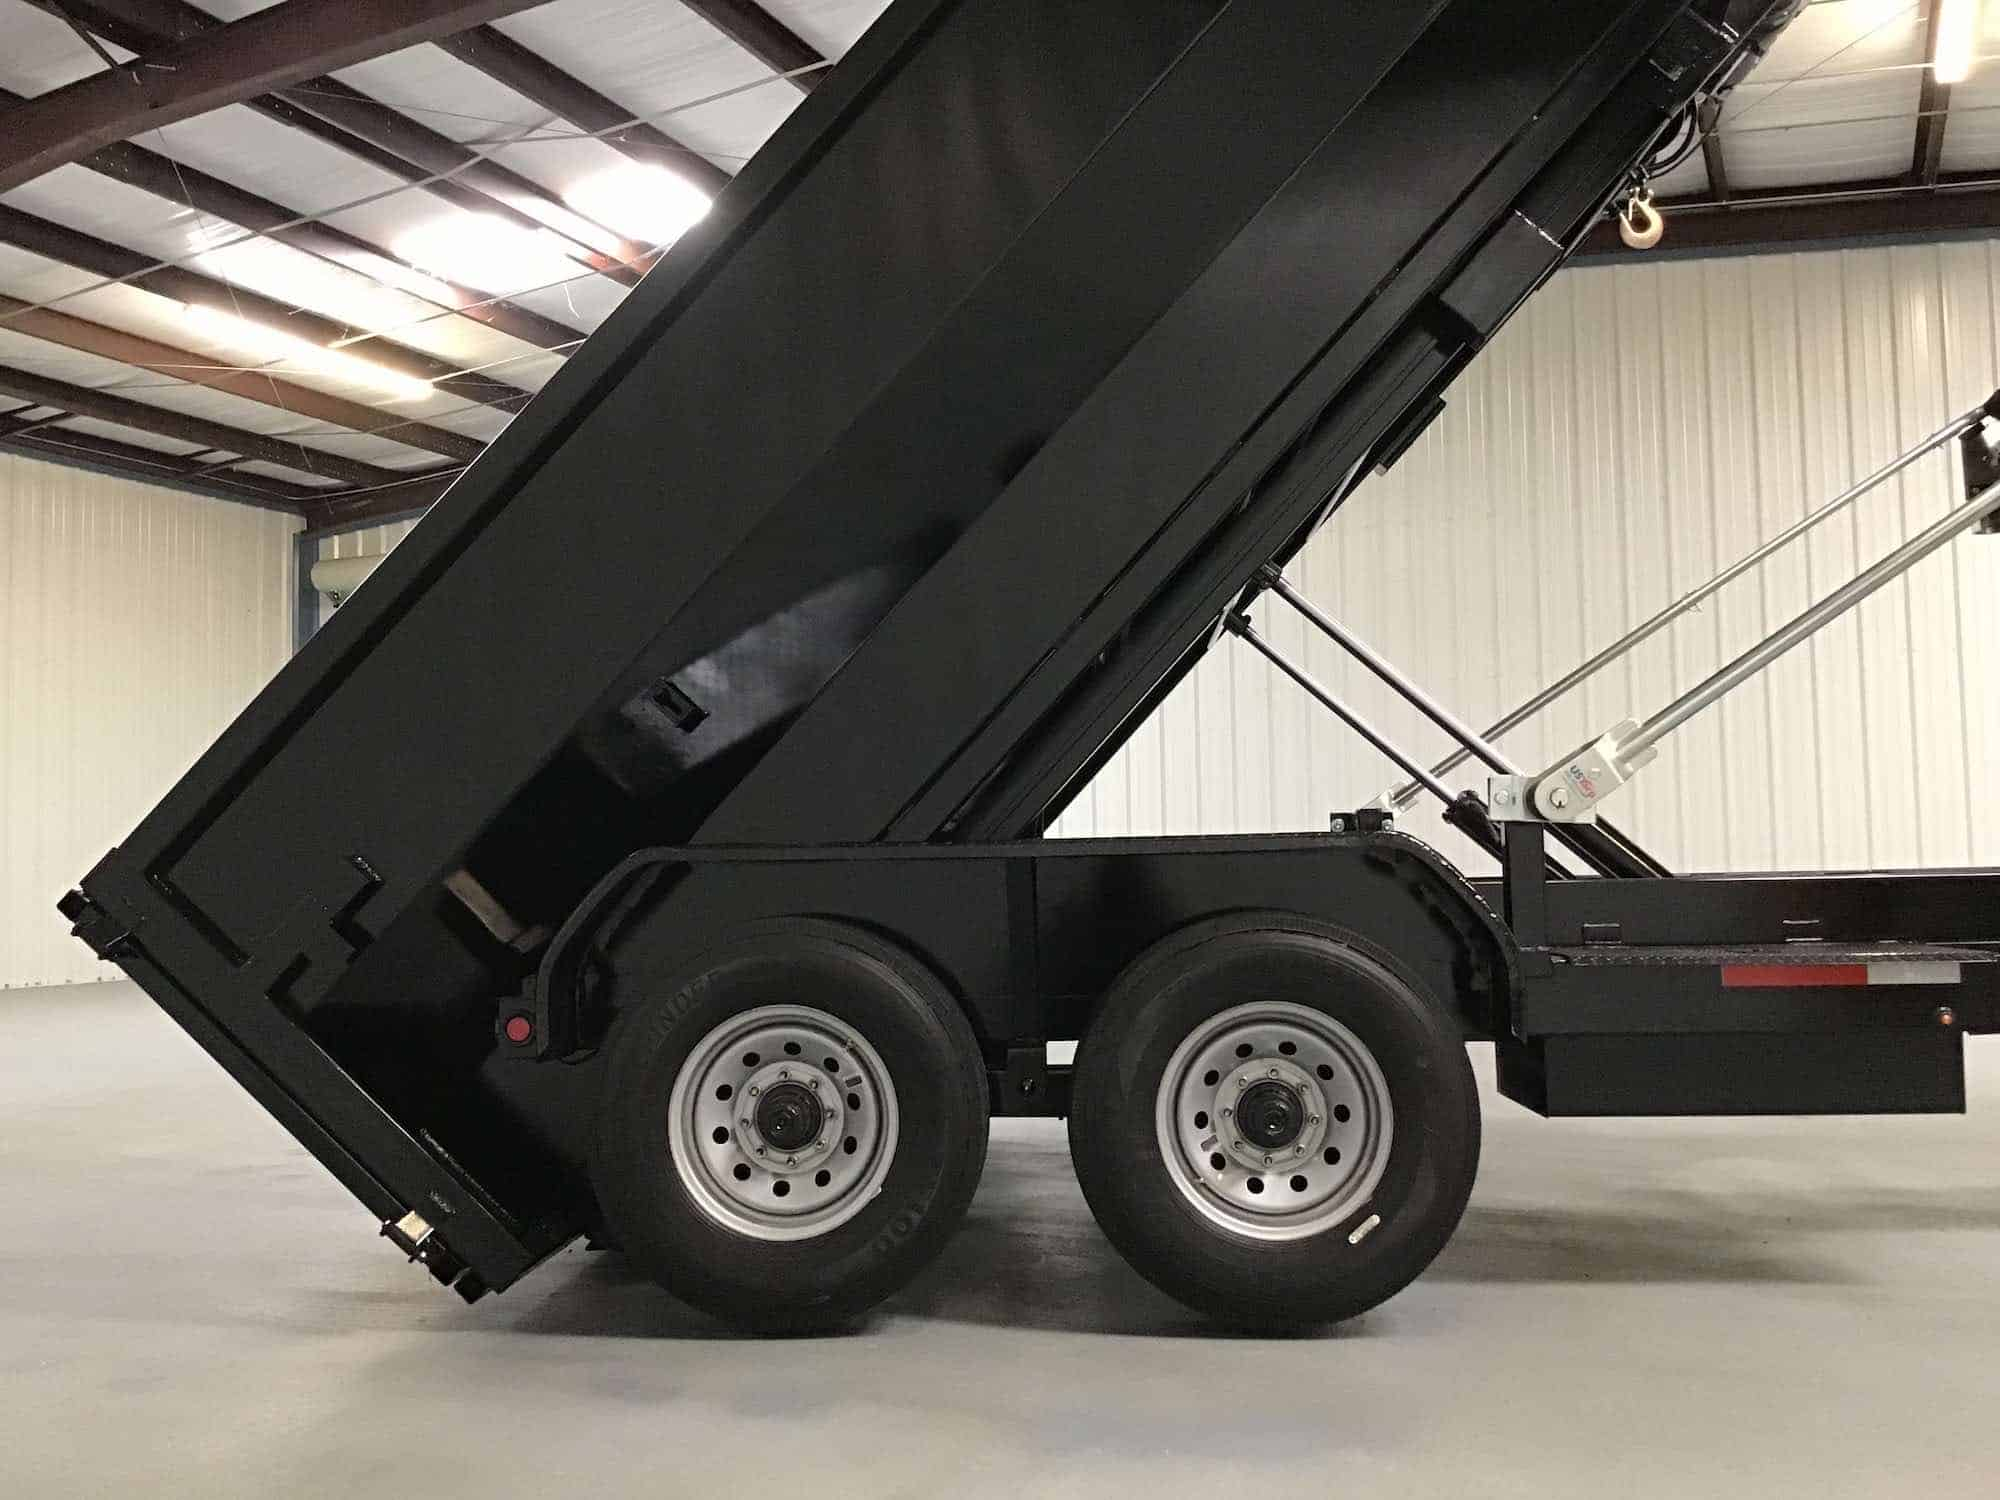 Come See Our Selection of Dump Trailers!